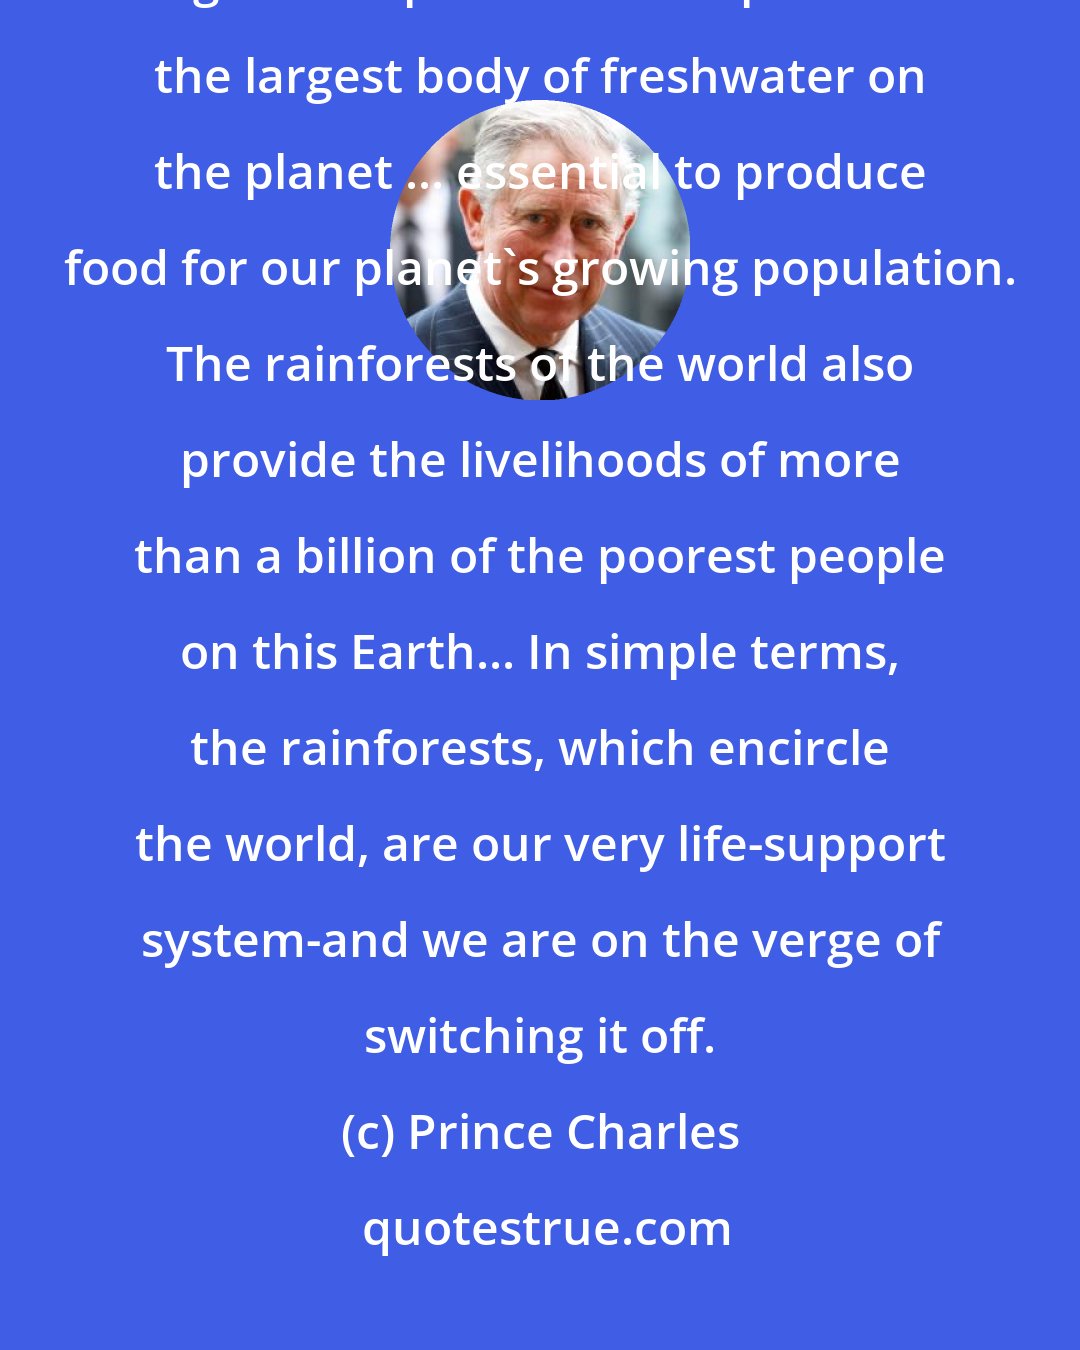 Prince Charles: Forests ... are in fact the world's air-conditioning system-the very lungs of the planet-and help to store the largest body of freshwater on the planet ... essential to produce food for our planet's growing population. The rainforests of the world also provide the livelihoods of more than a billion of the poorest people on this Earth... In simple terms, the rainforests, which encircle the world, are our very life-support system-and we are on the verge of switching it off.